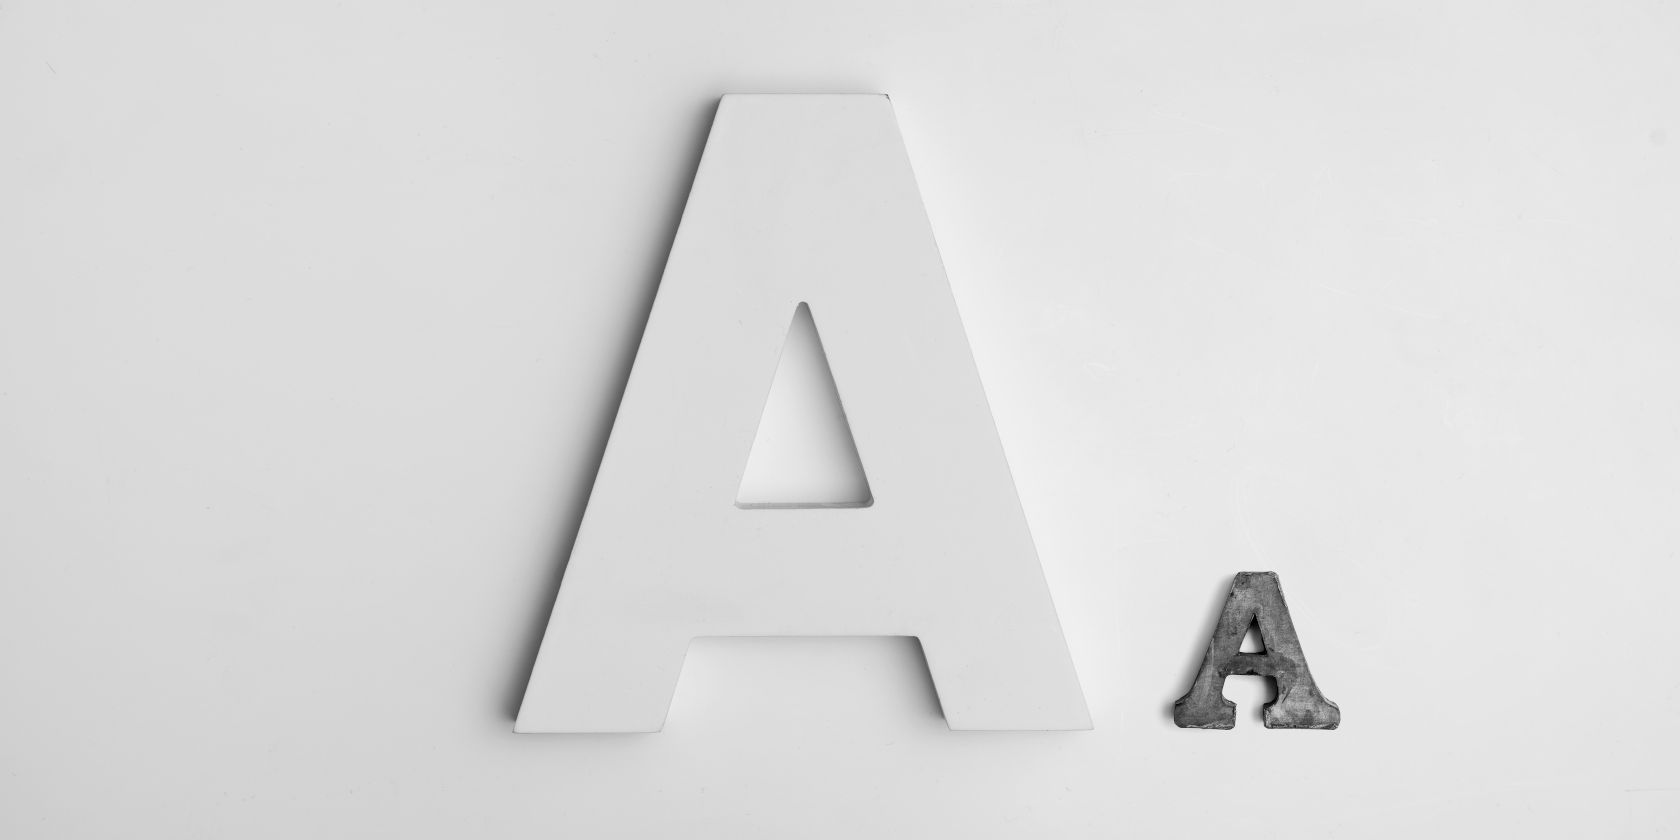 cool photoshop fonts download